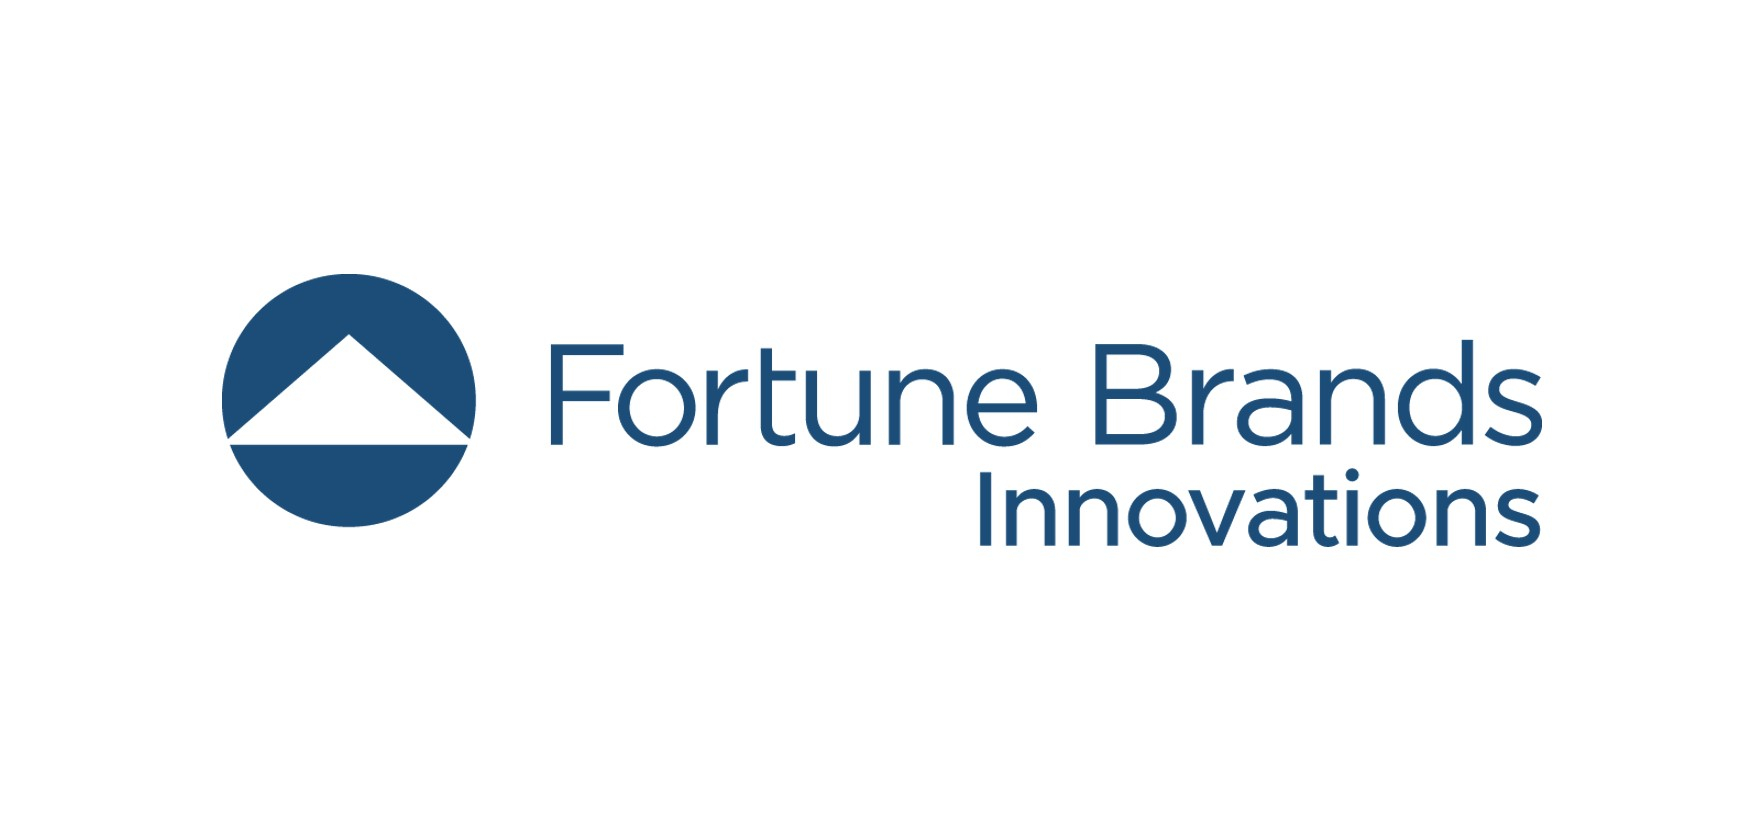 Company Announces it is Rebranding as Fortune Brands Innovations